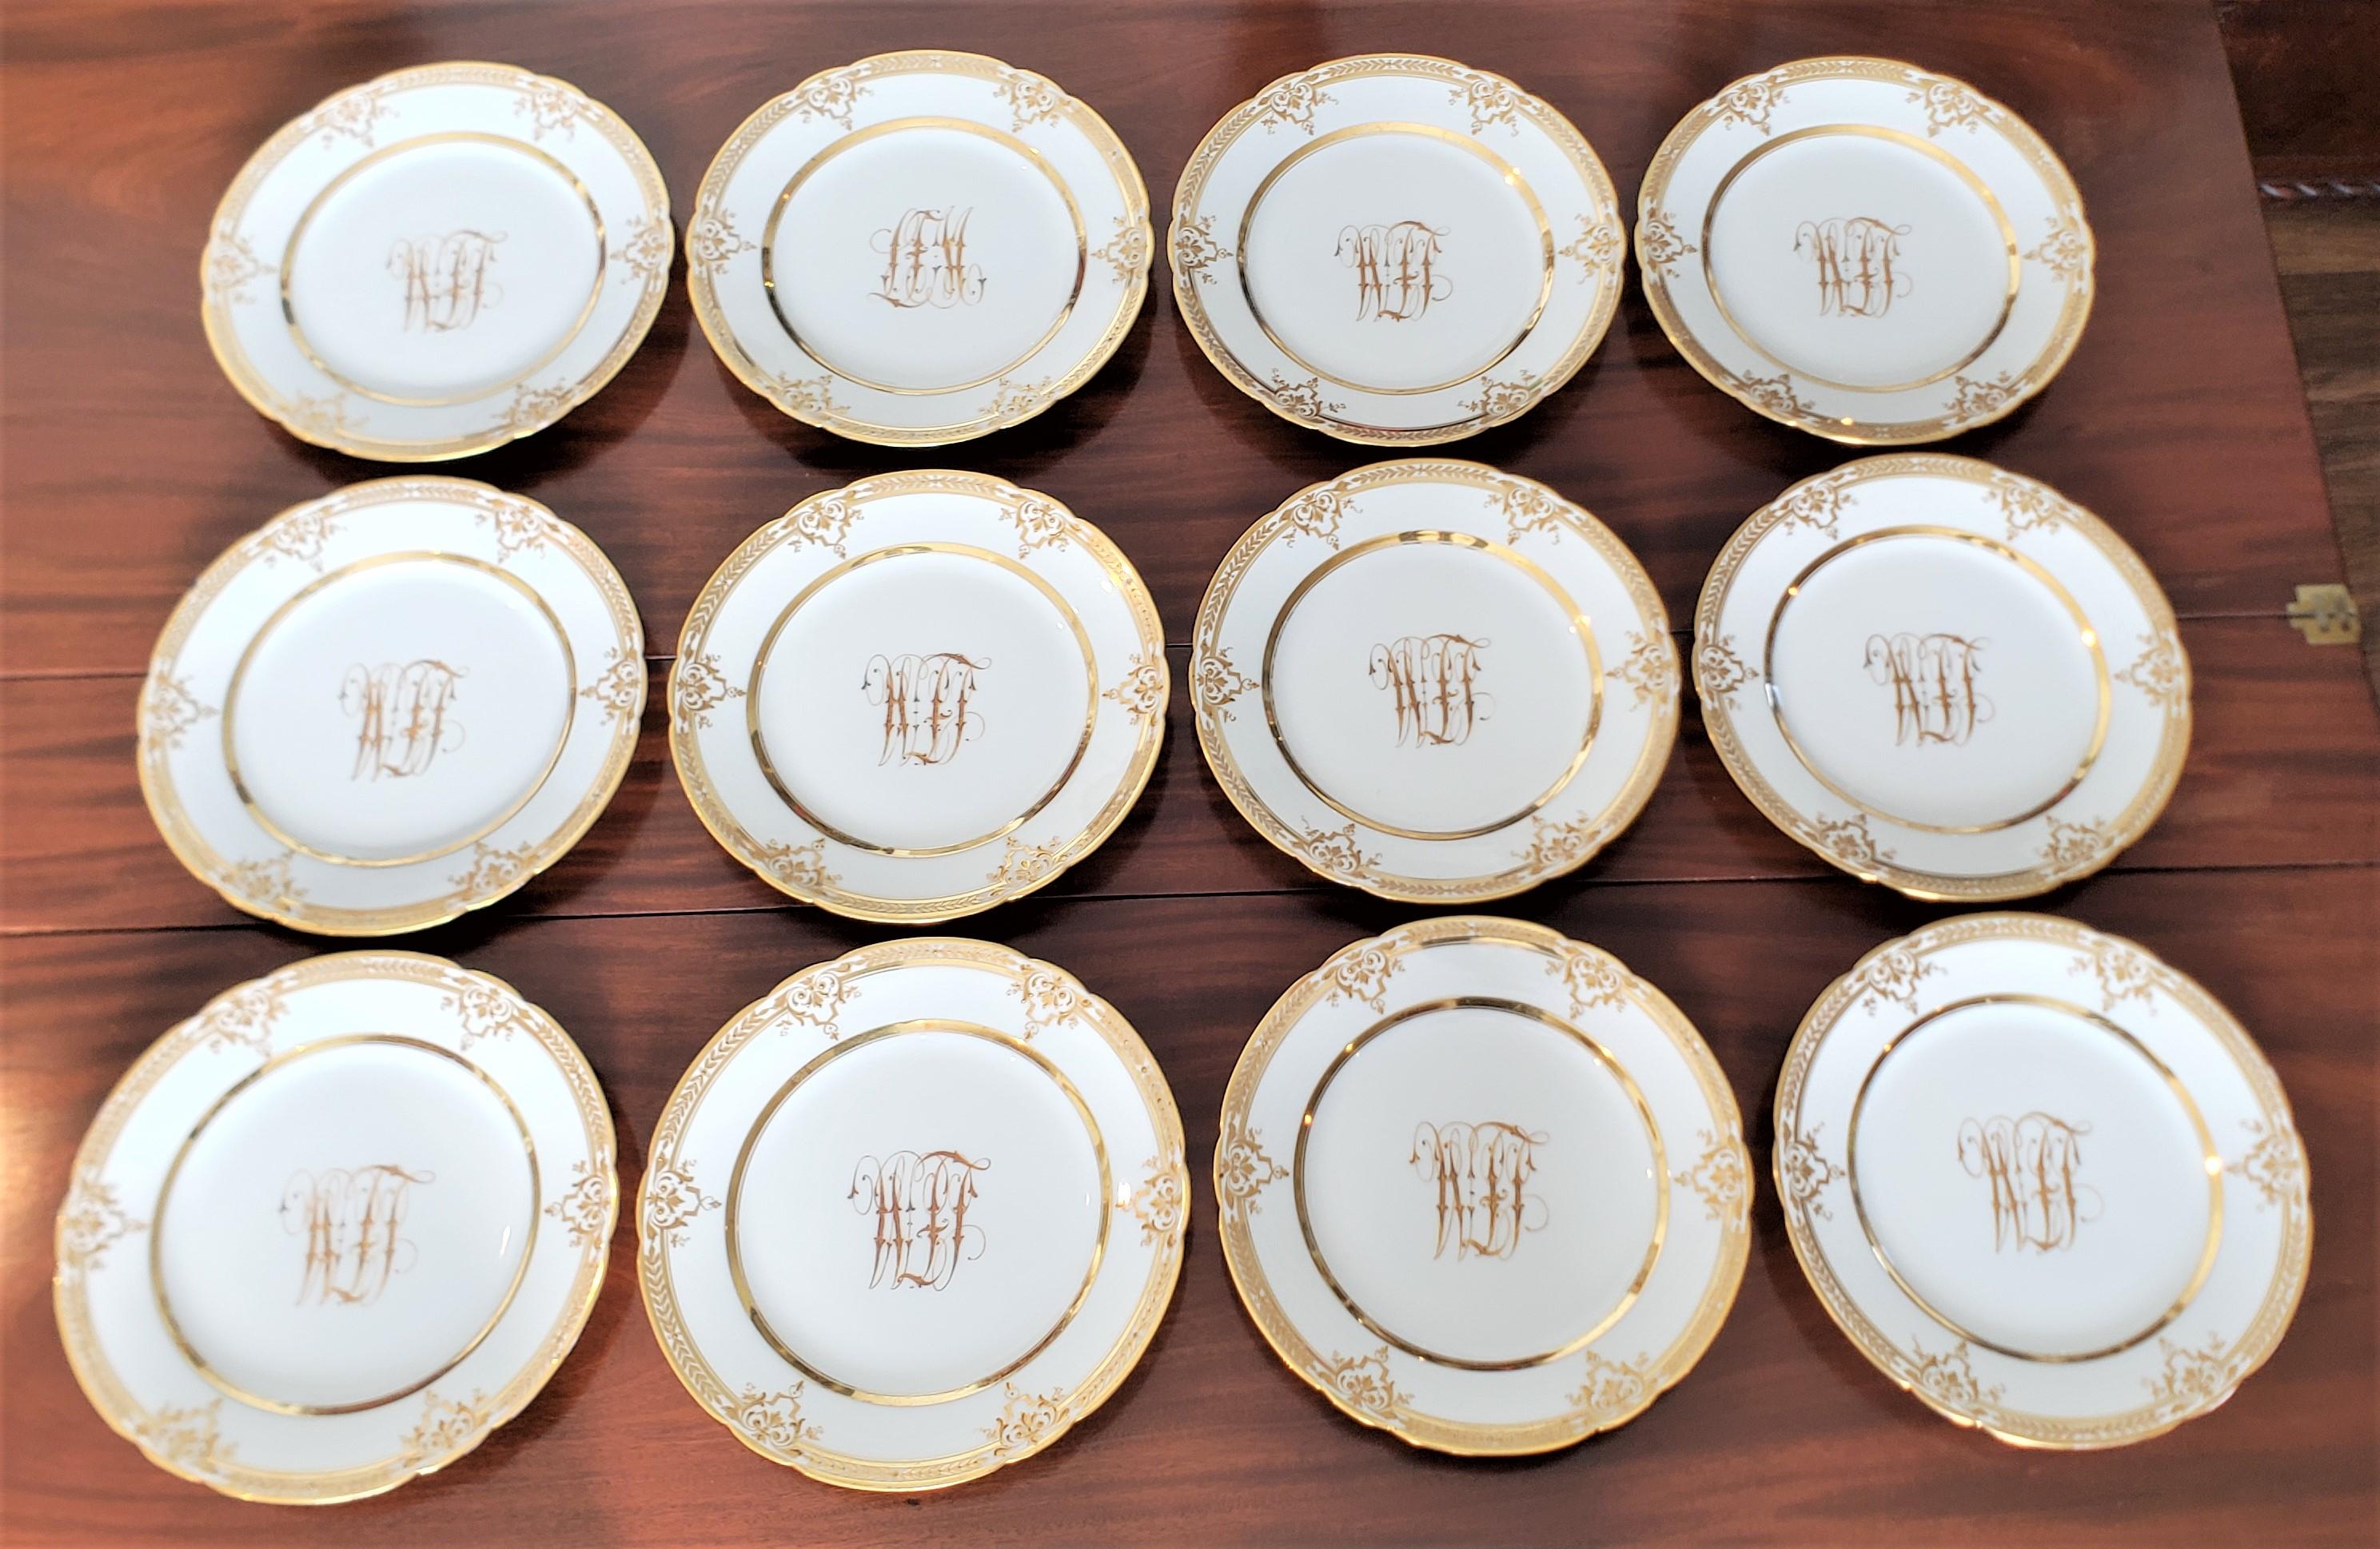 This set of 12 antique porcelain dinner plates were made by the renowned Dresden factory of Germany in approximately 1890 in a Rococo Revival style. The plates are done in white ground with elaborate and ornate gilt hand-painted banding and a large